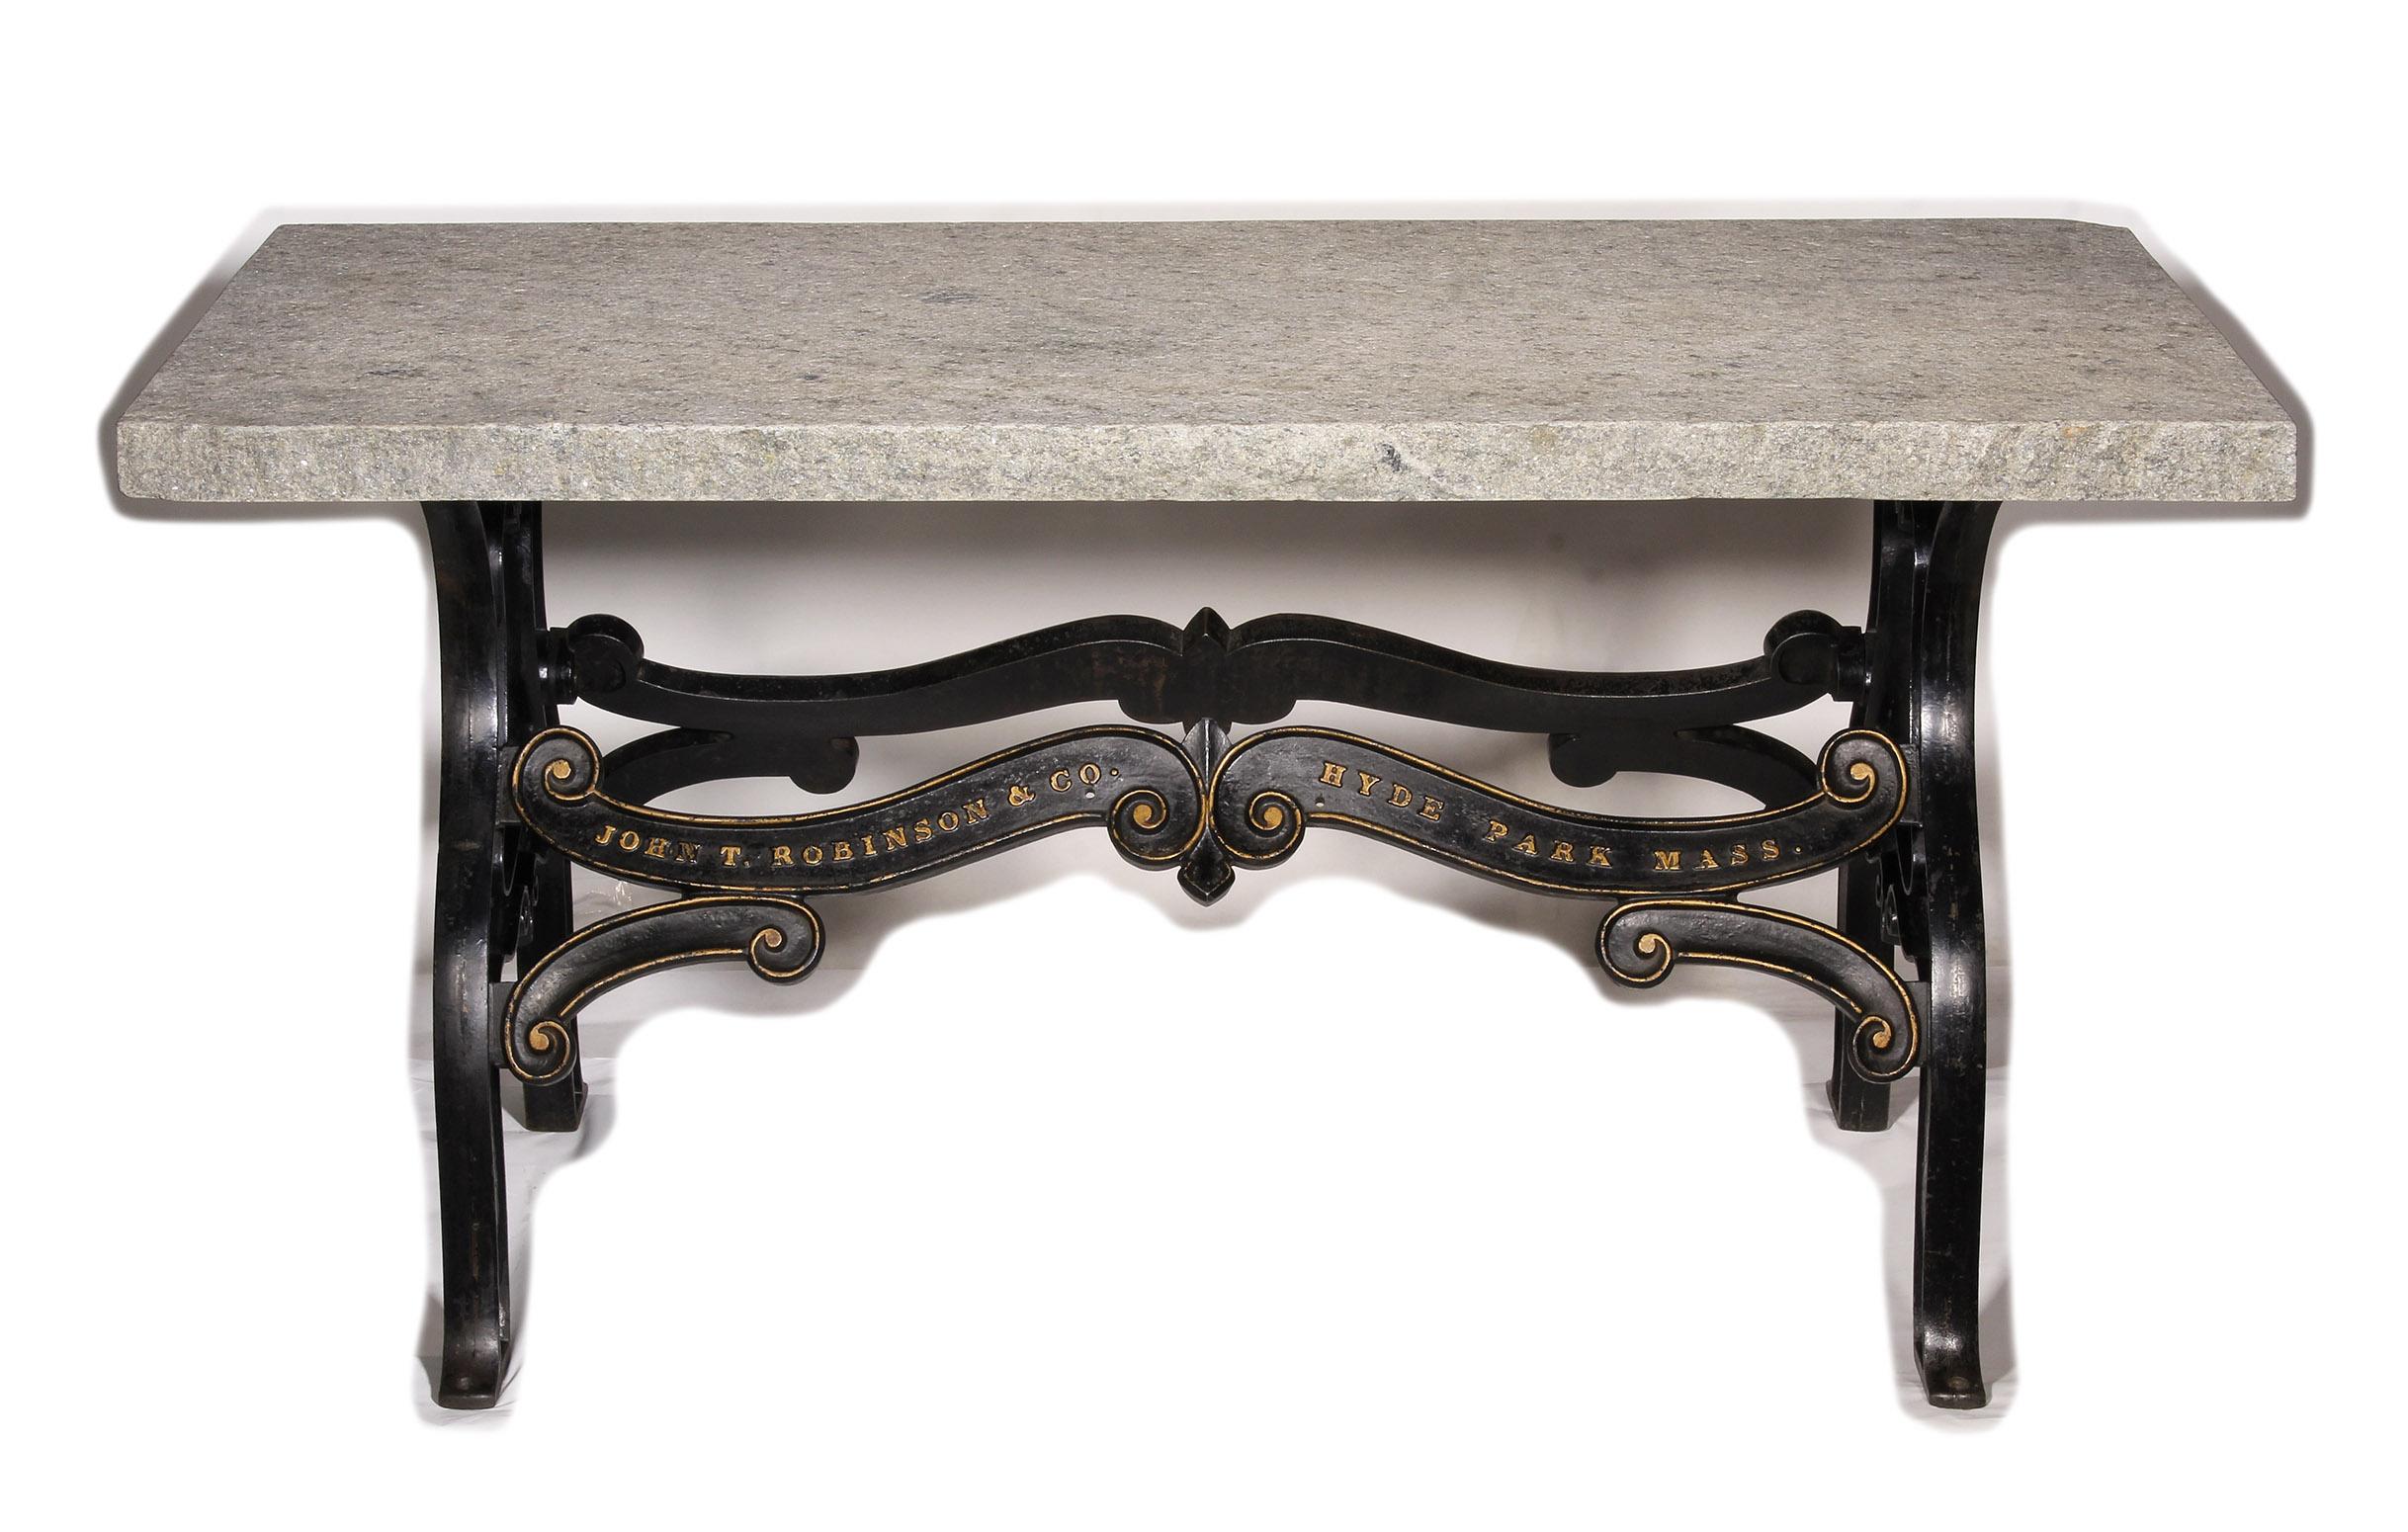 Beautiful cast iron base from an old printing factory in original condition, showing detailed artwork topped with a piece of Vermont granite.